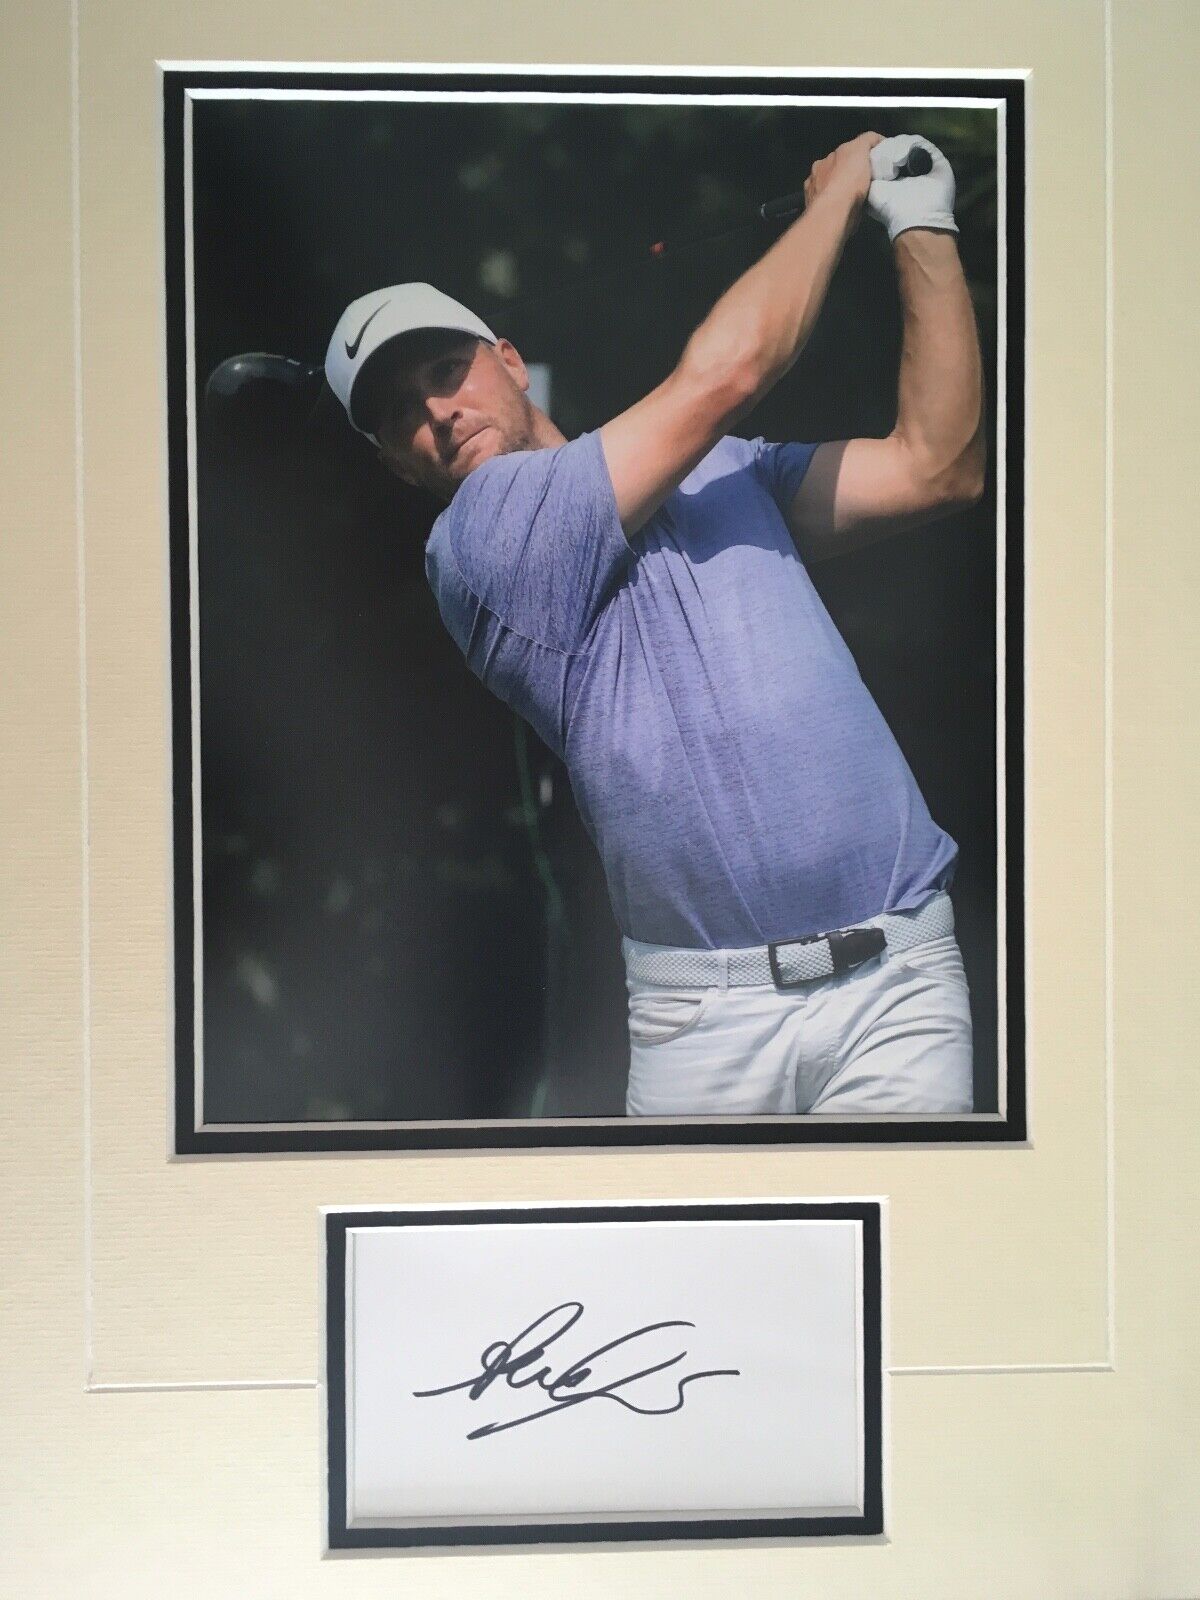 ALEX NOREN - SWEDISH PROFESSIONAL GOLFER - SUPERB SIGNED Photo Poster painting DISPLAY